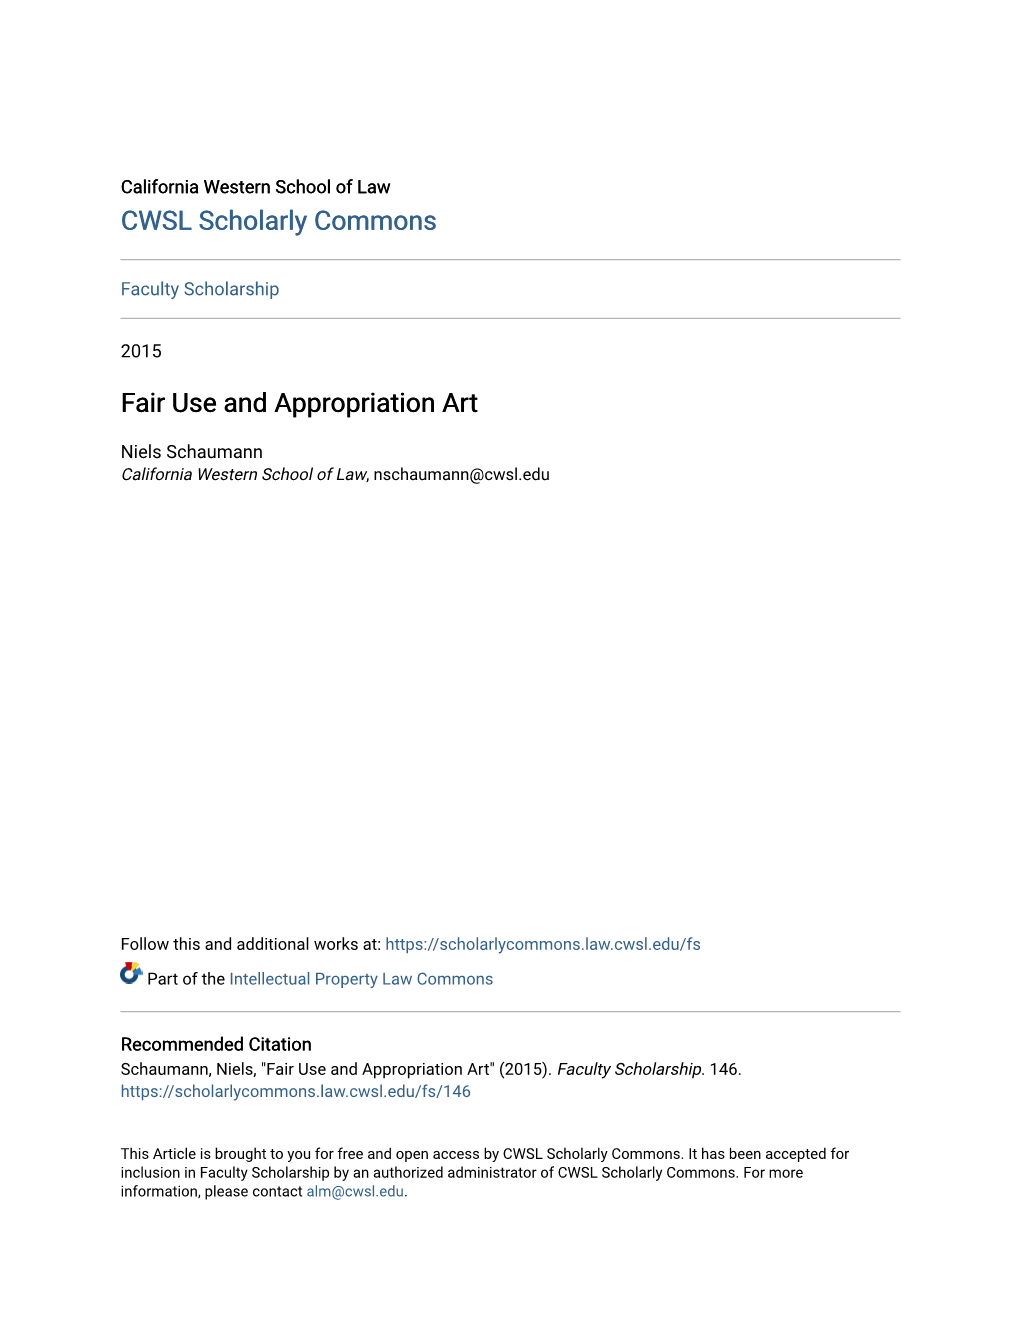 Fair Use and Appropriation Art